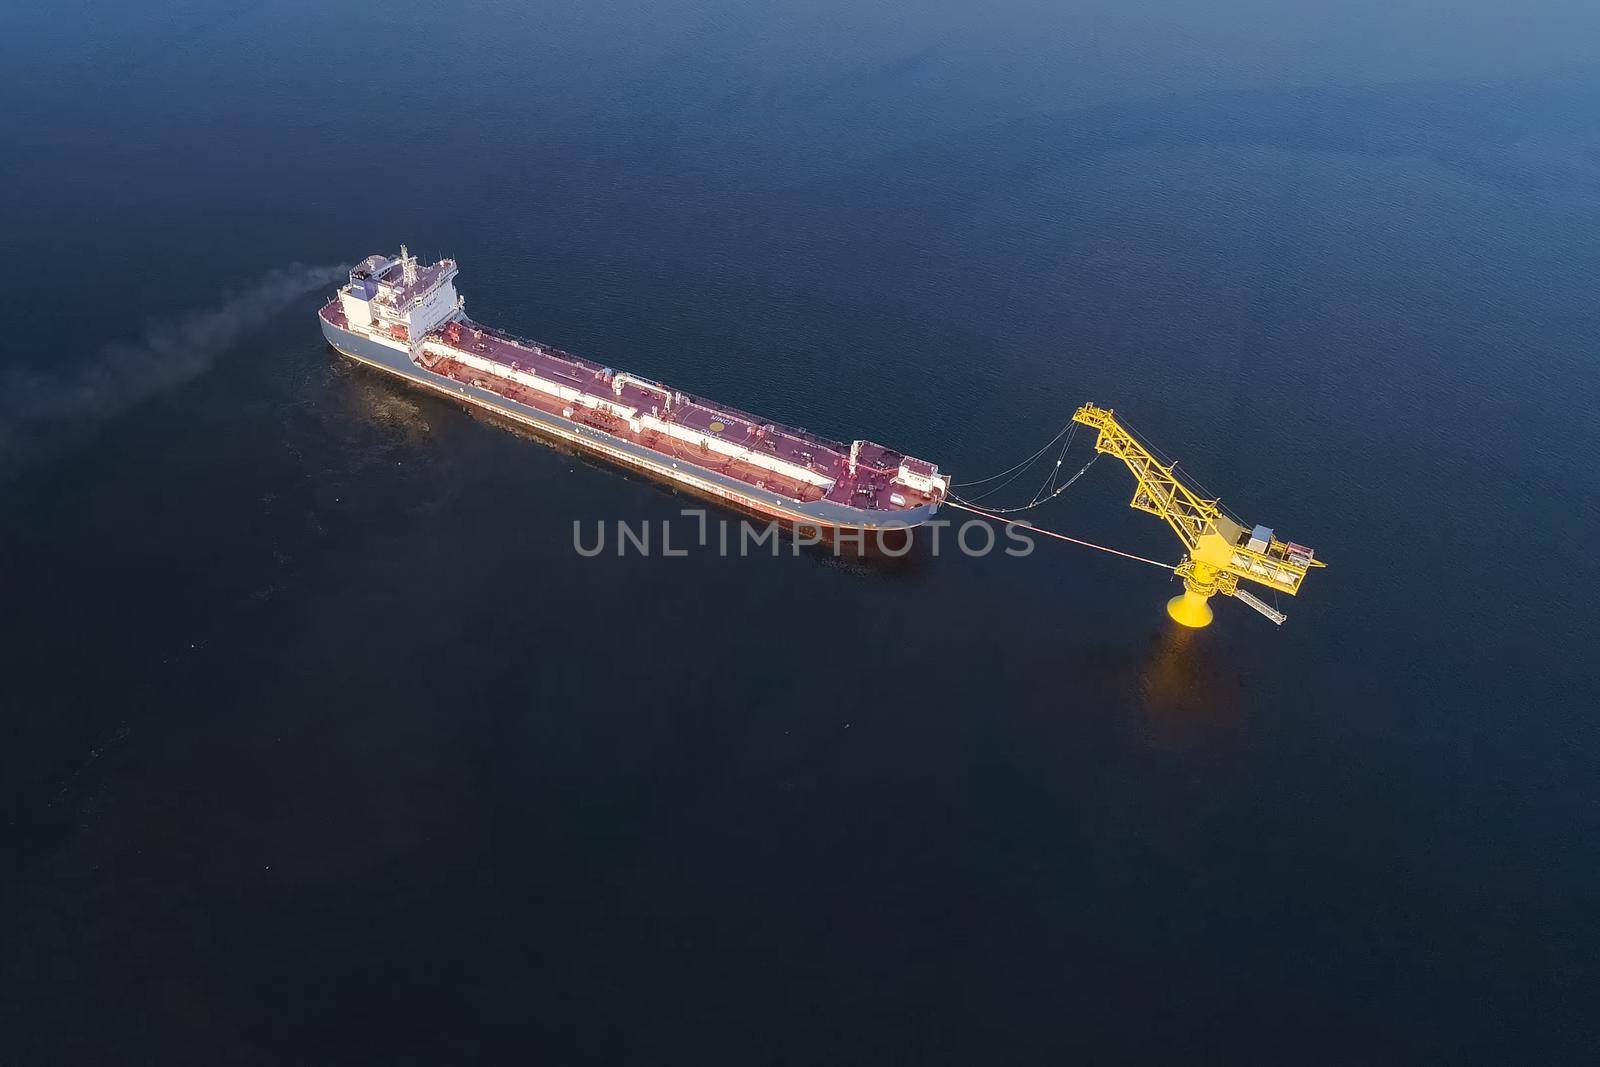 tanker is filled with liquefied natural gas, transporting gas by sea. by DePo